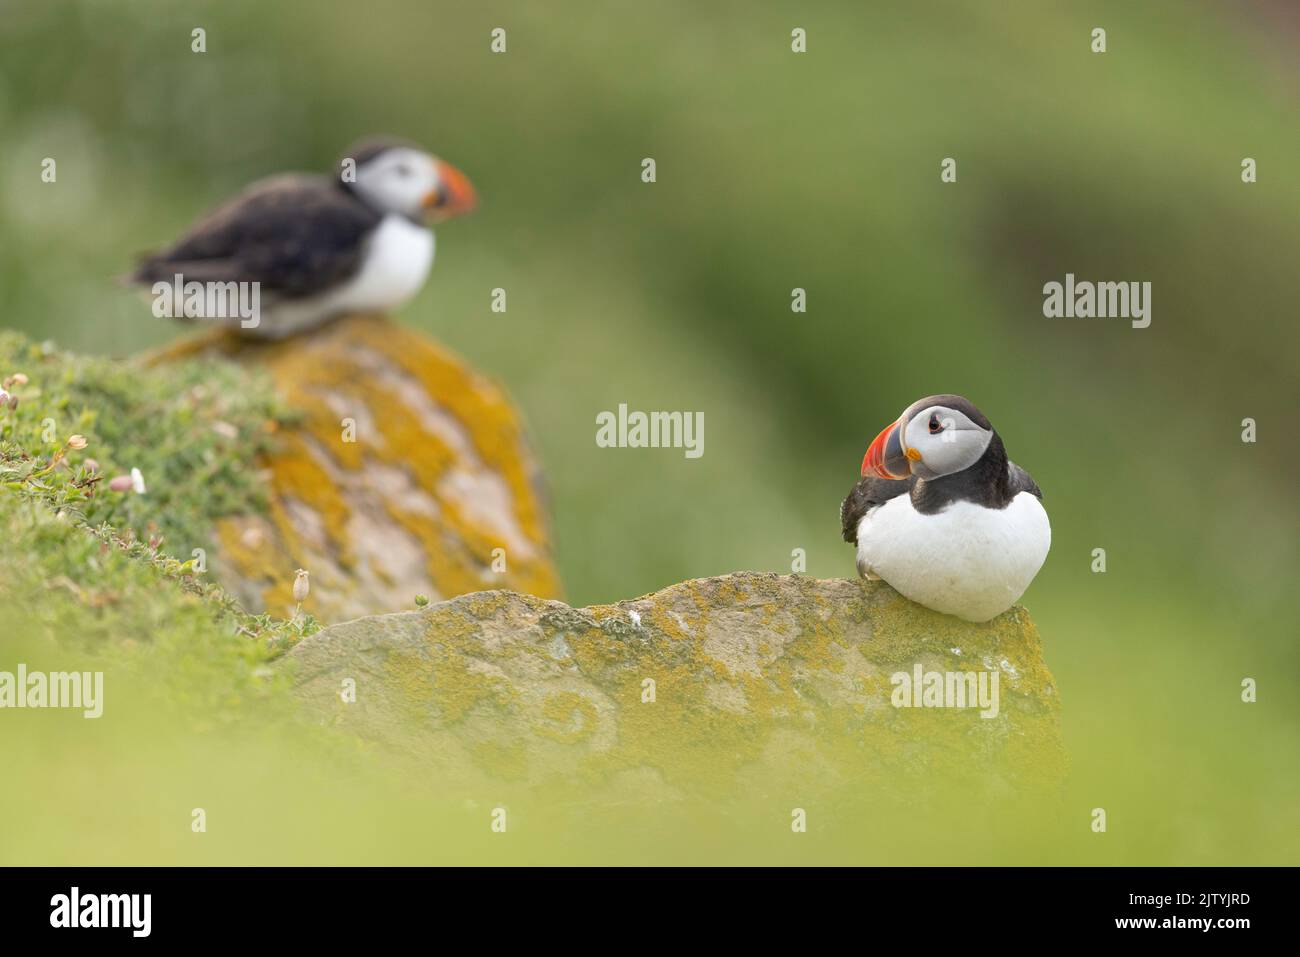 Two Atlantic Puffins (Fratercula arctica) resdting on rocks outside burrows, Great Saltee Island, Co. Wexford, Republic of Ireland Stock Photo